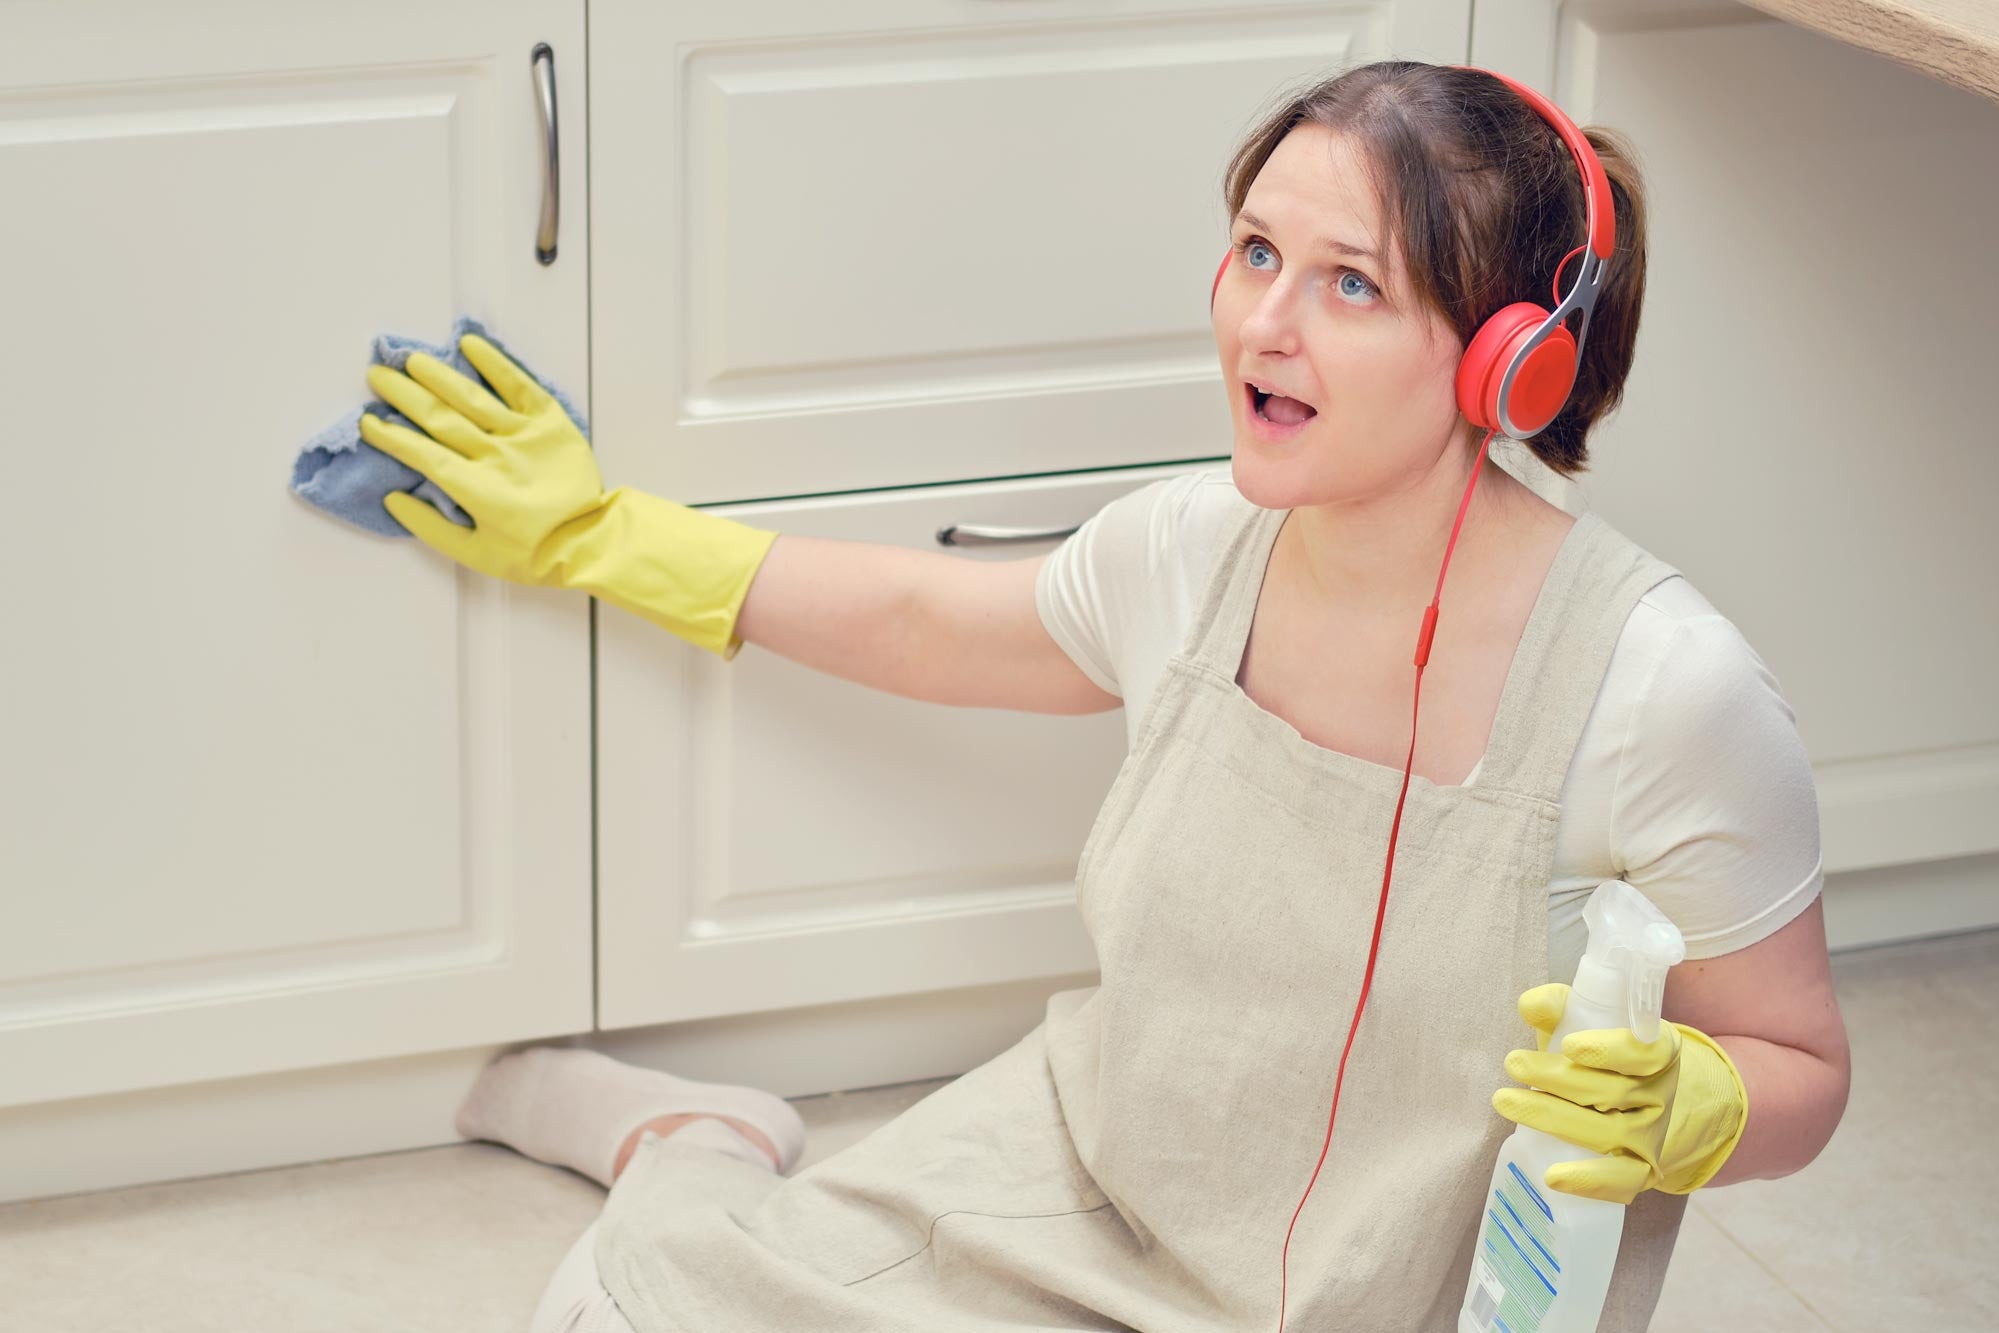 A woman wearing red headphones and yellow rubber cleaning gloves. She sits on the floor, wiping down a cabinet while looking enthralled by whatever she's listening to.